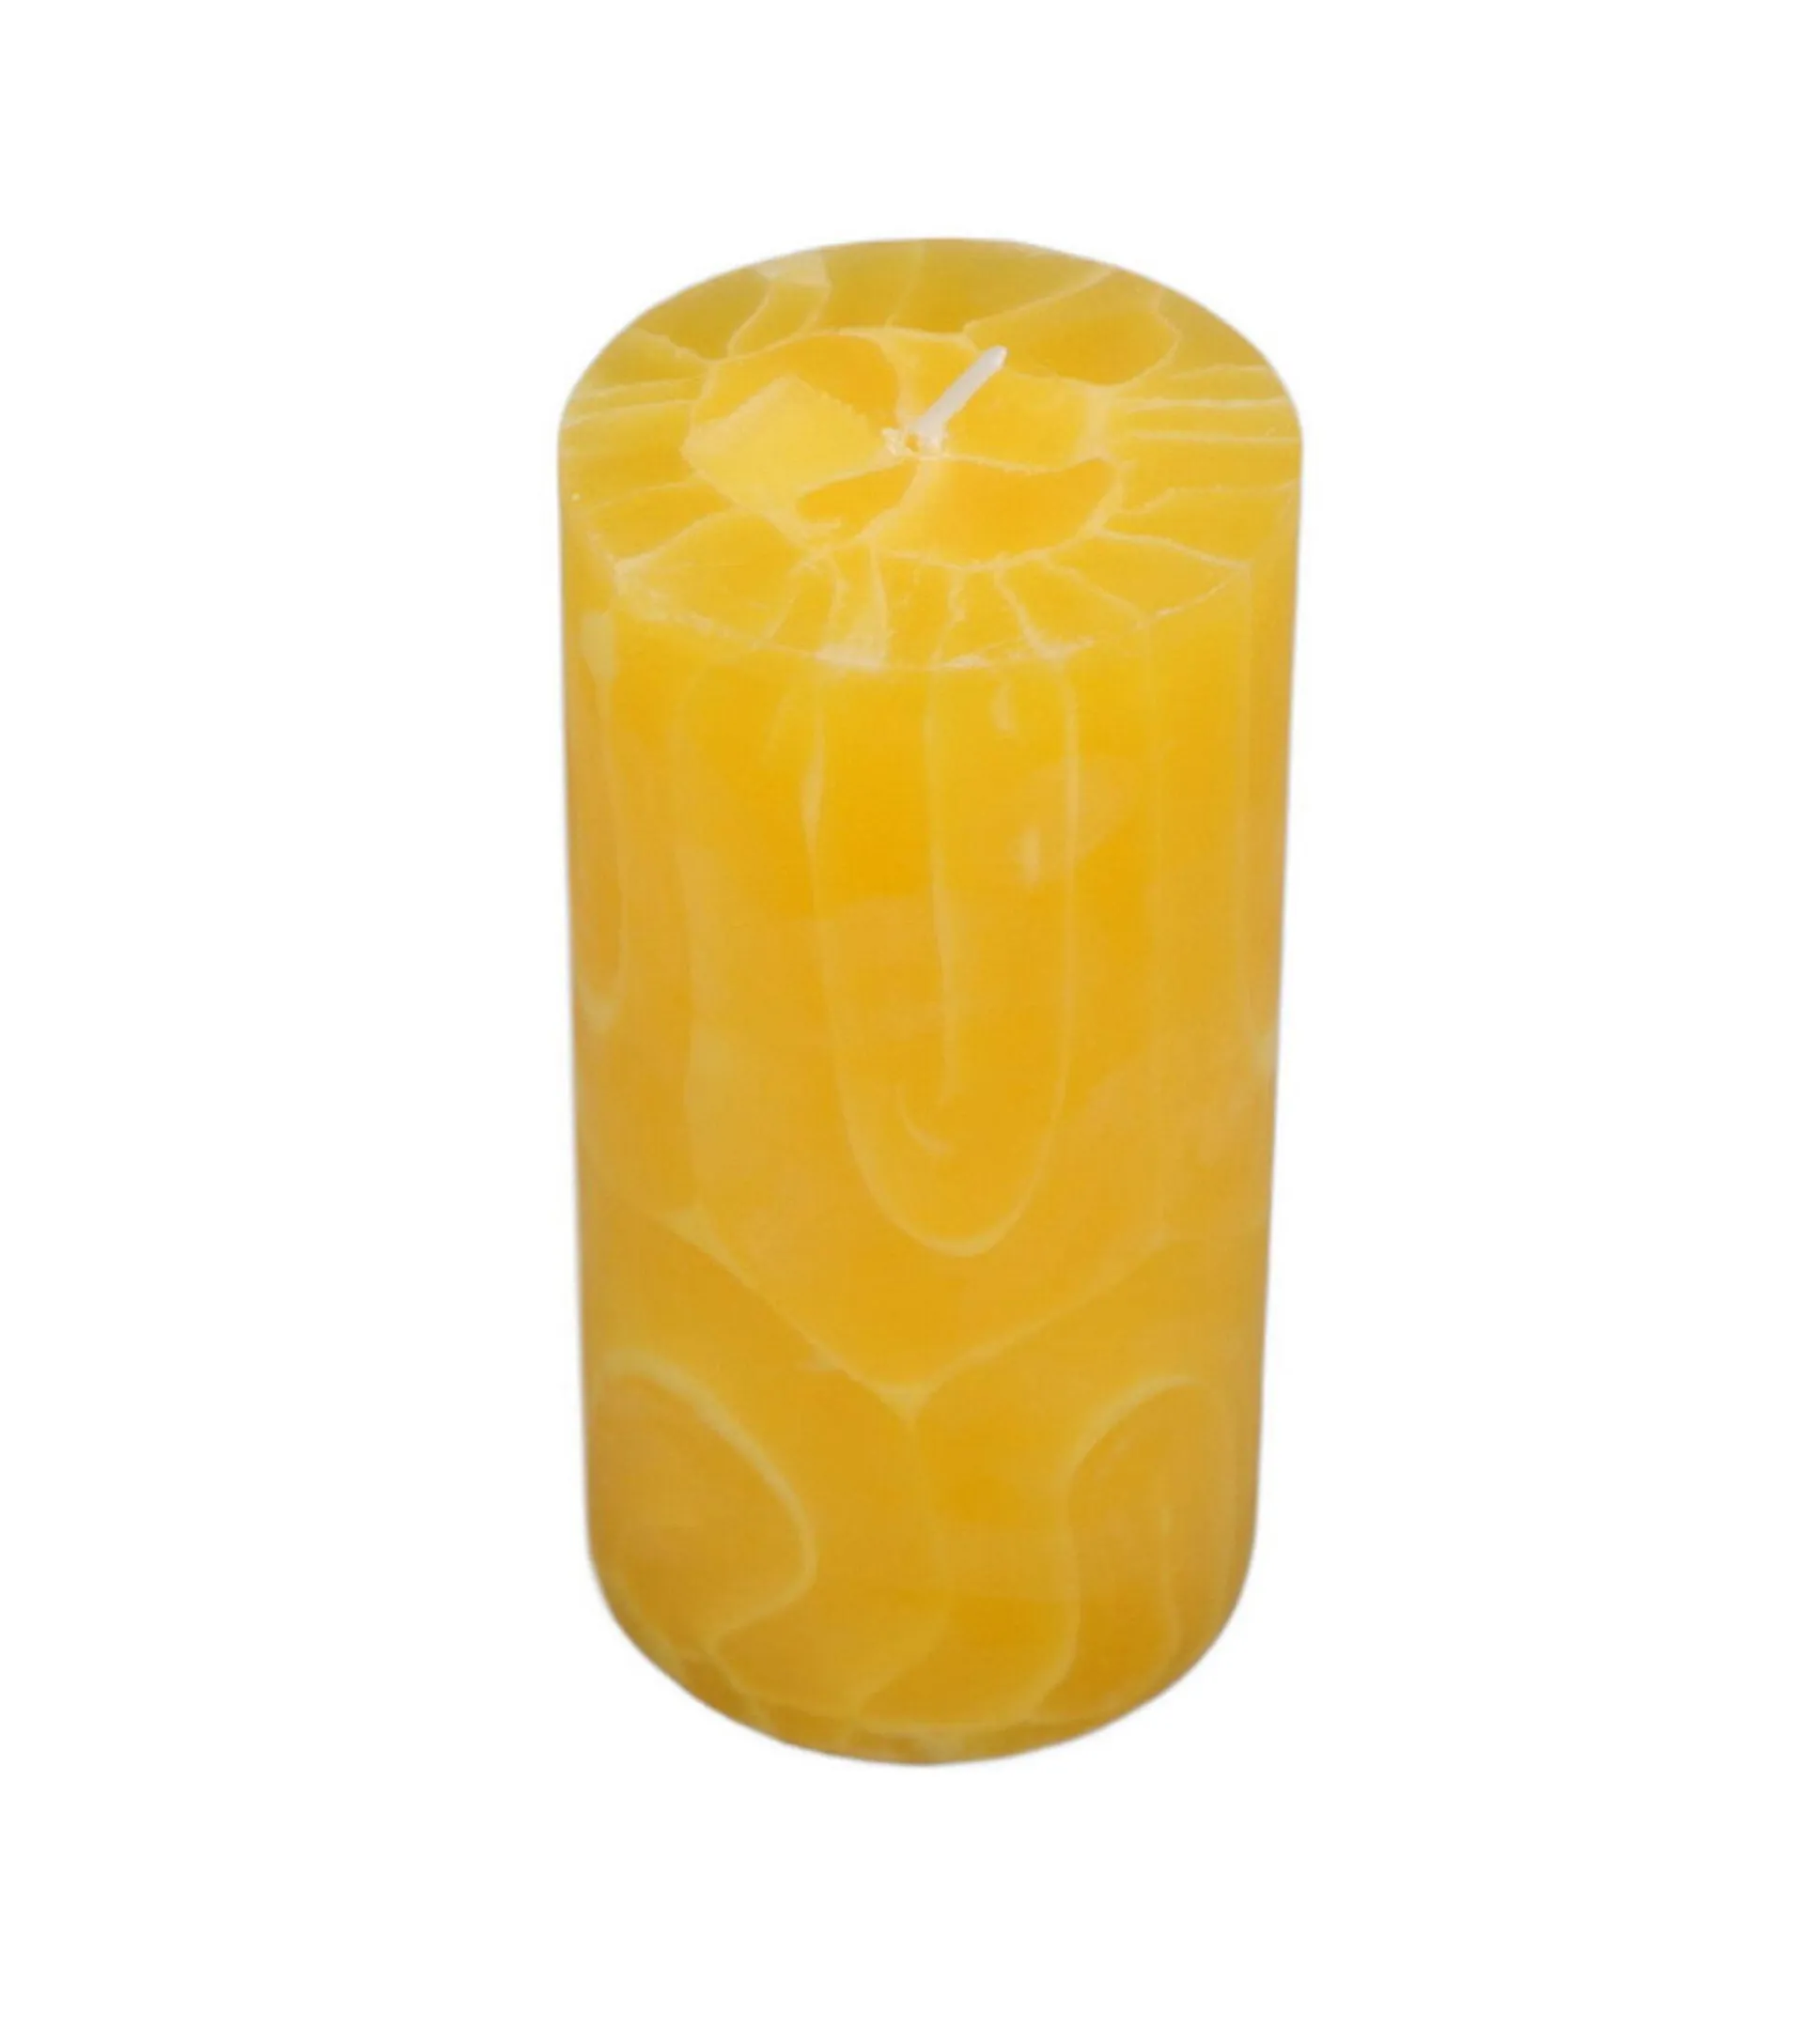 20.5oz Hand Poured Scented Pillar Candle by Place & Time